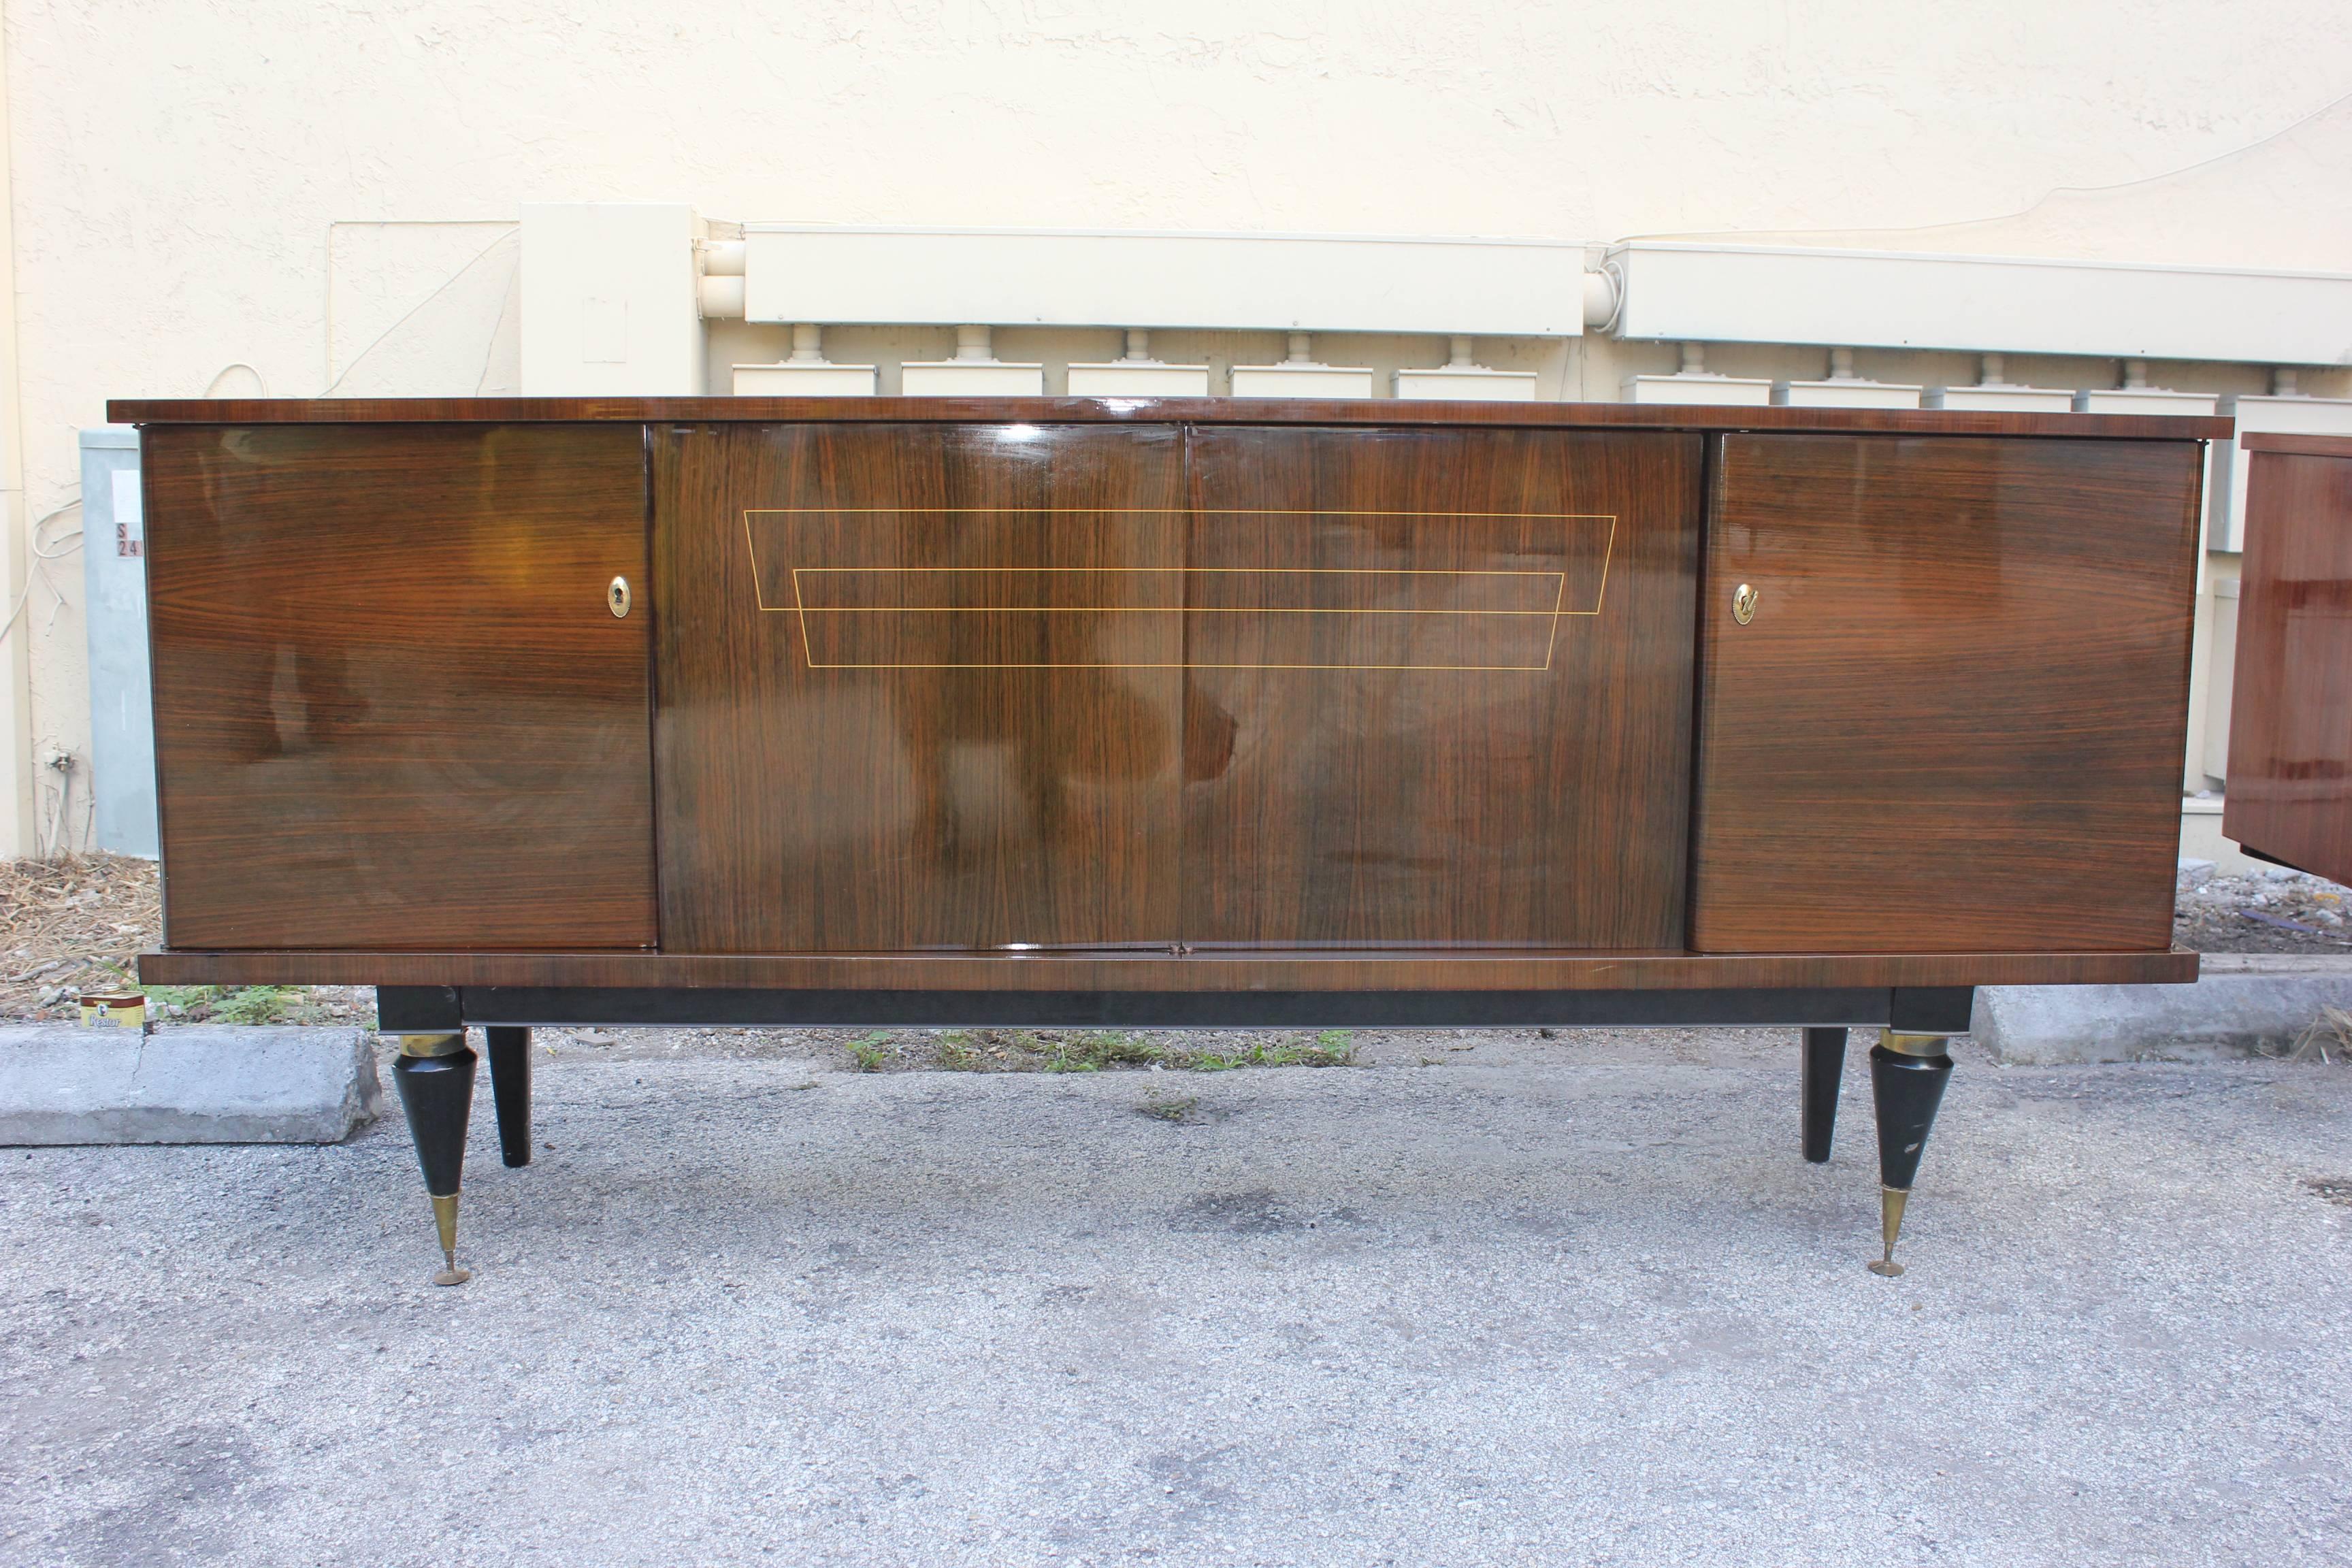 French Art Deco exotic Macassar ebony sideboard, circa 1940s. Interior fitted with one shelf on each side. Lemonwood interior.